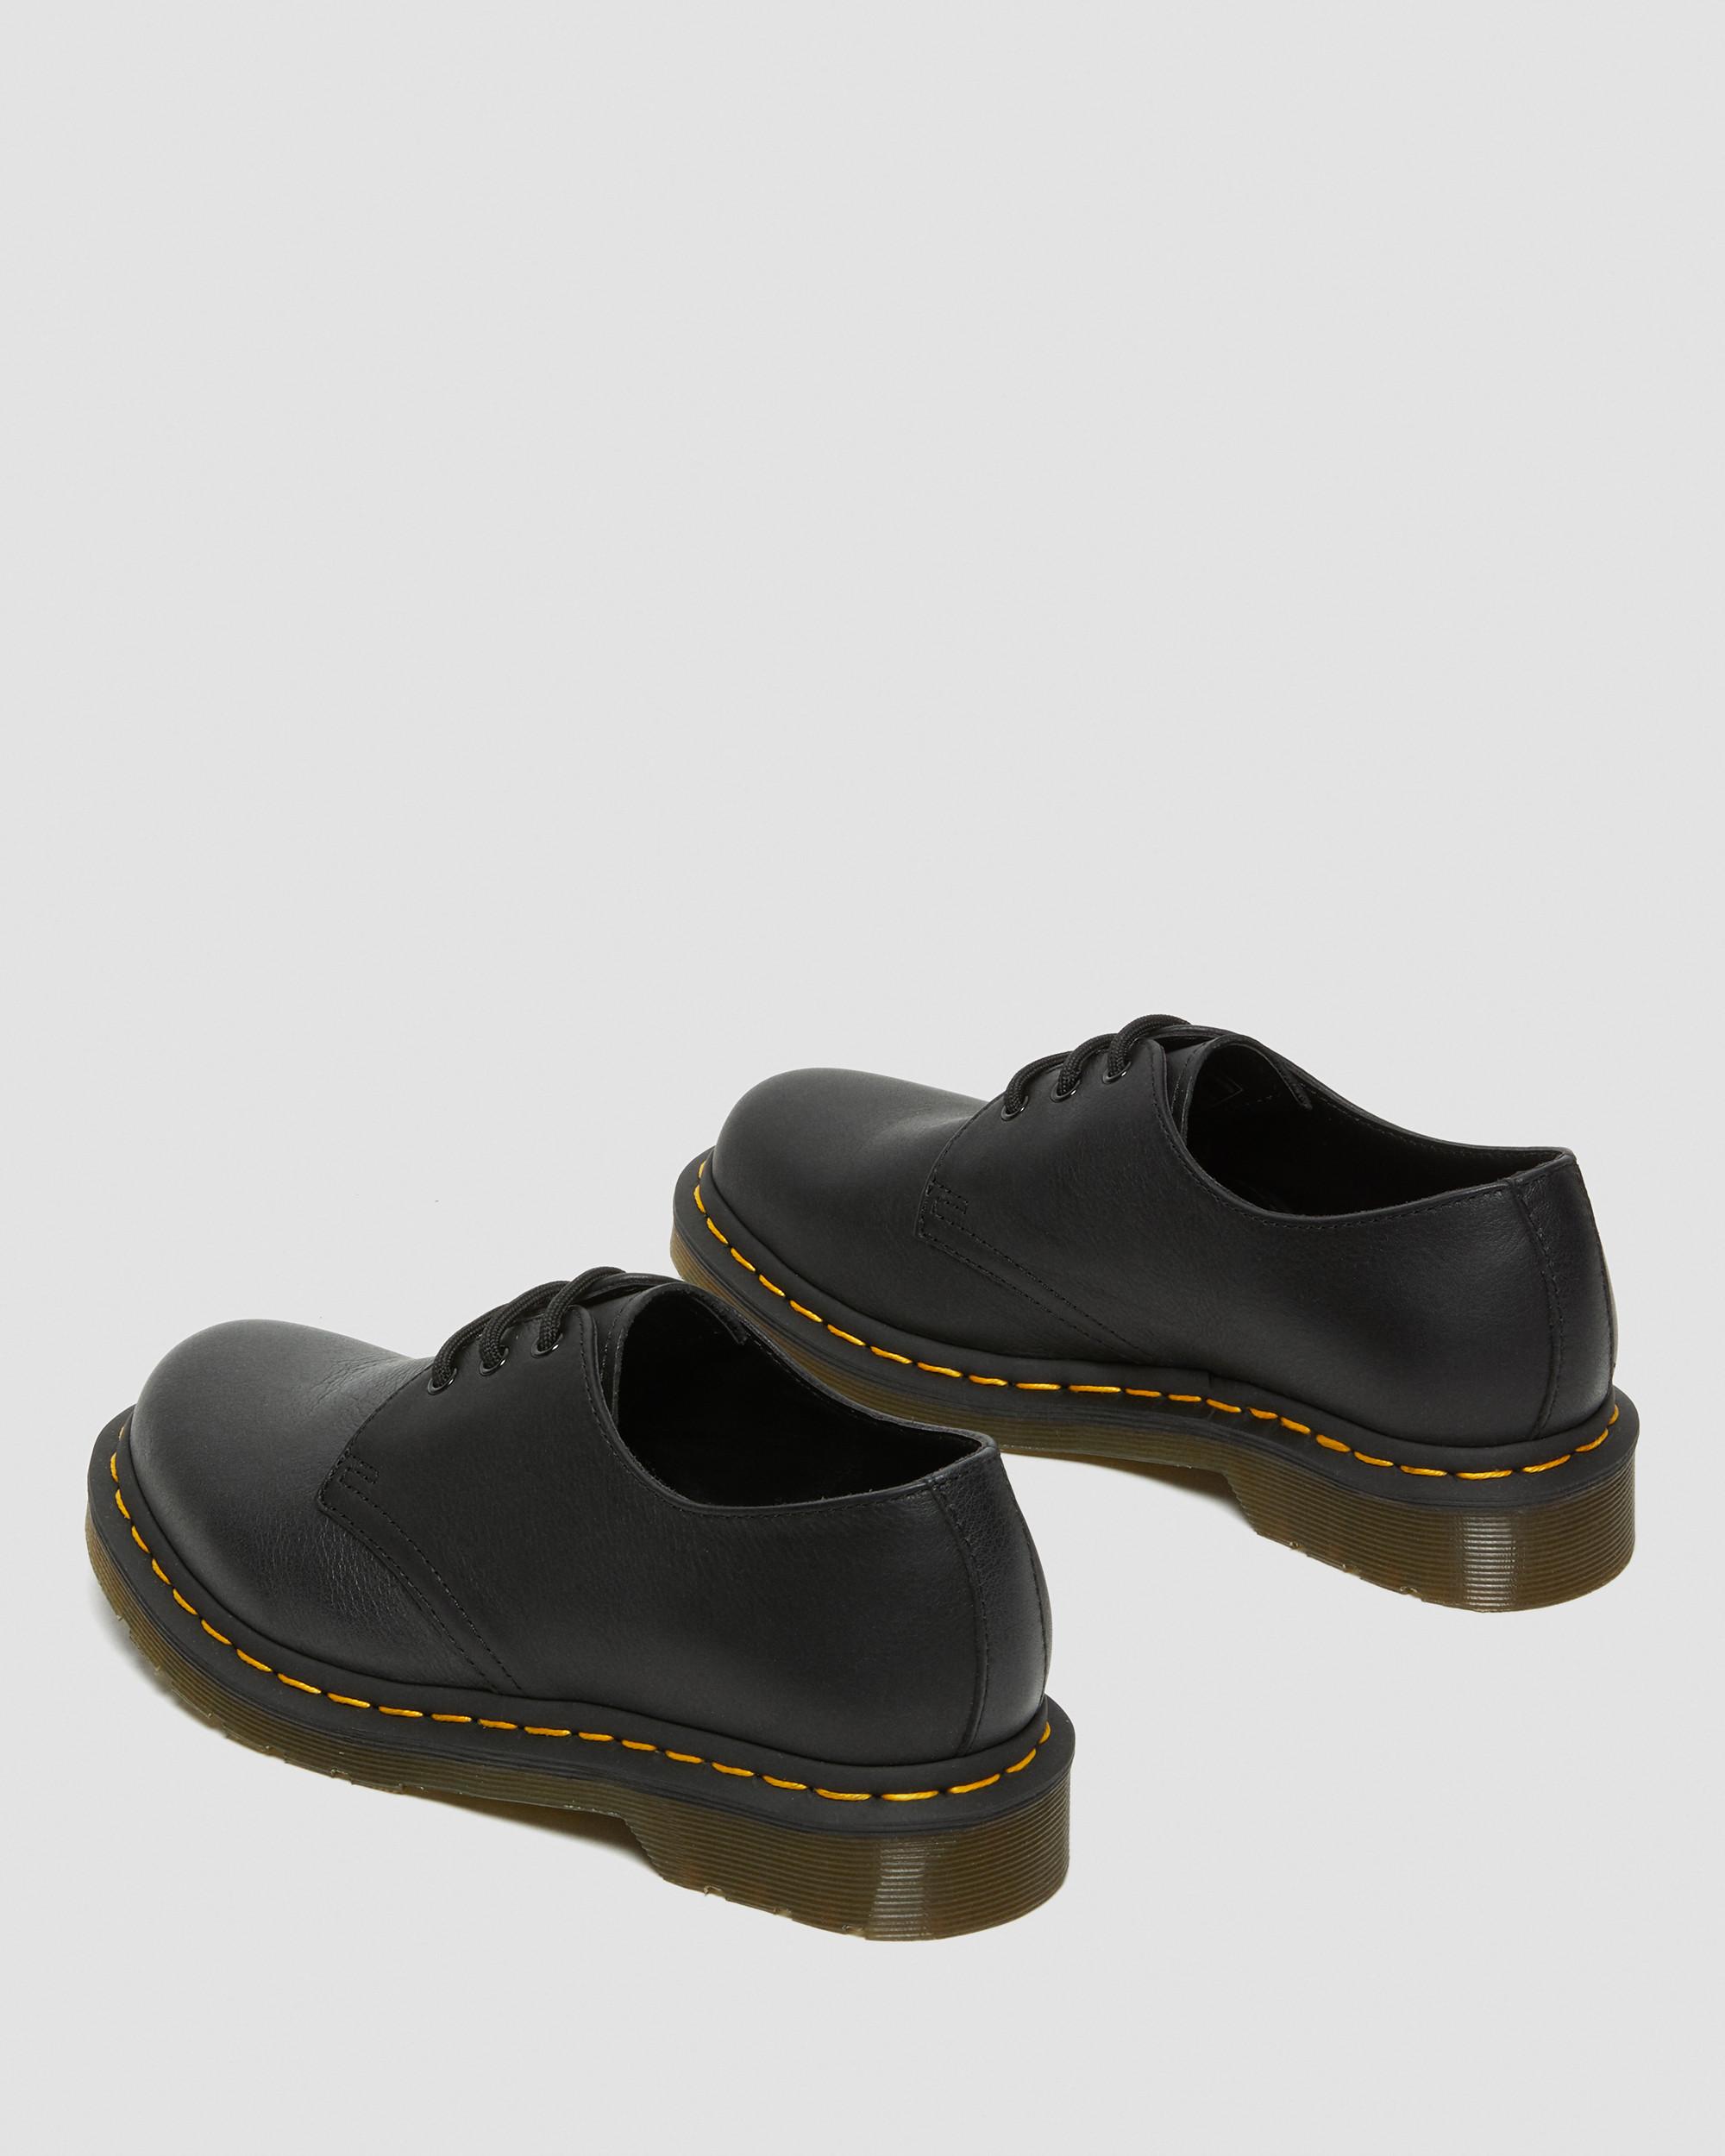 1461 Women's Virginia Leather Oxford Shoes in Black